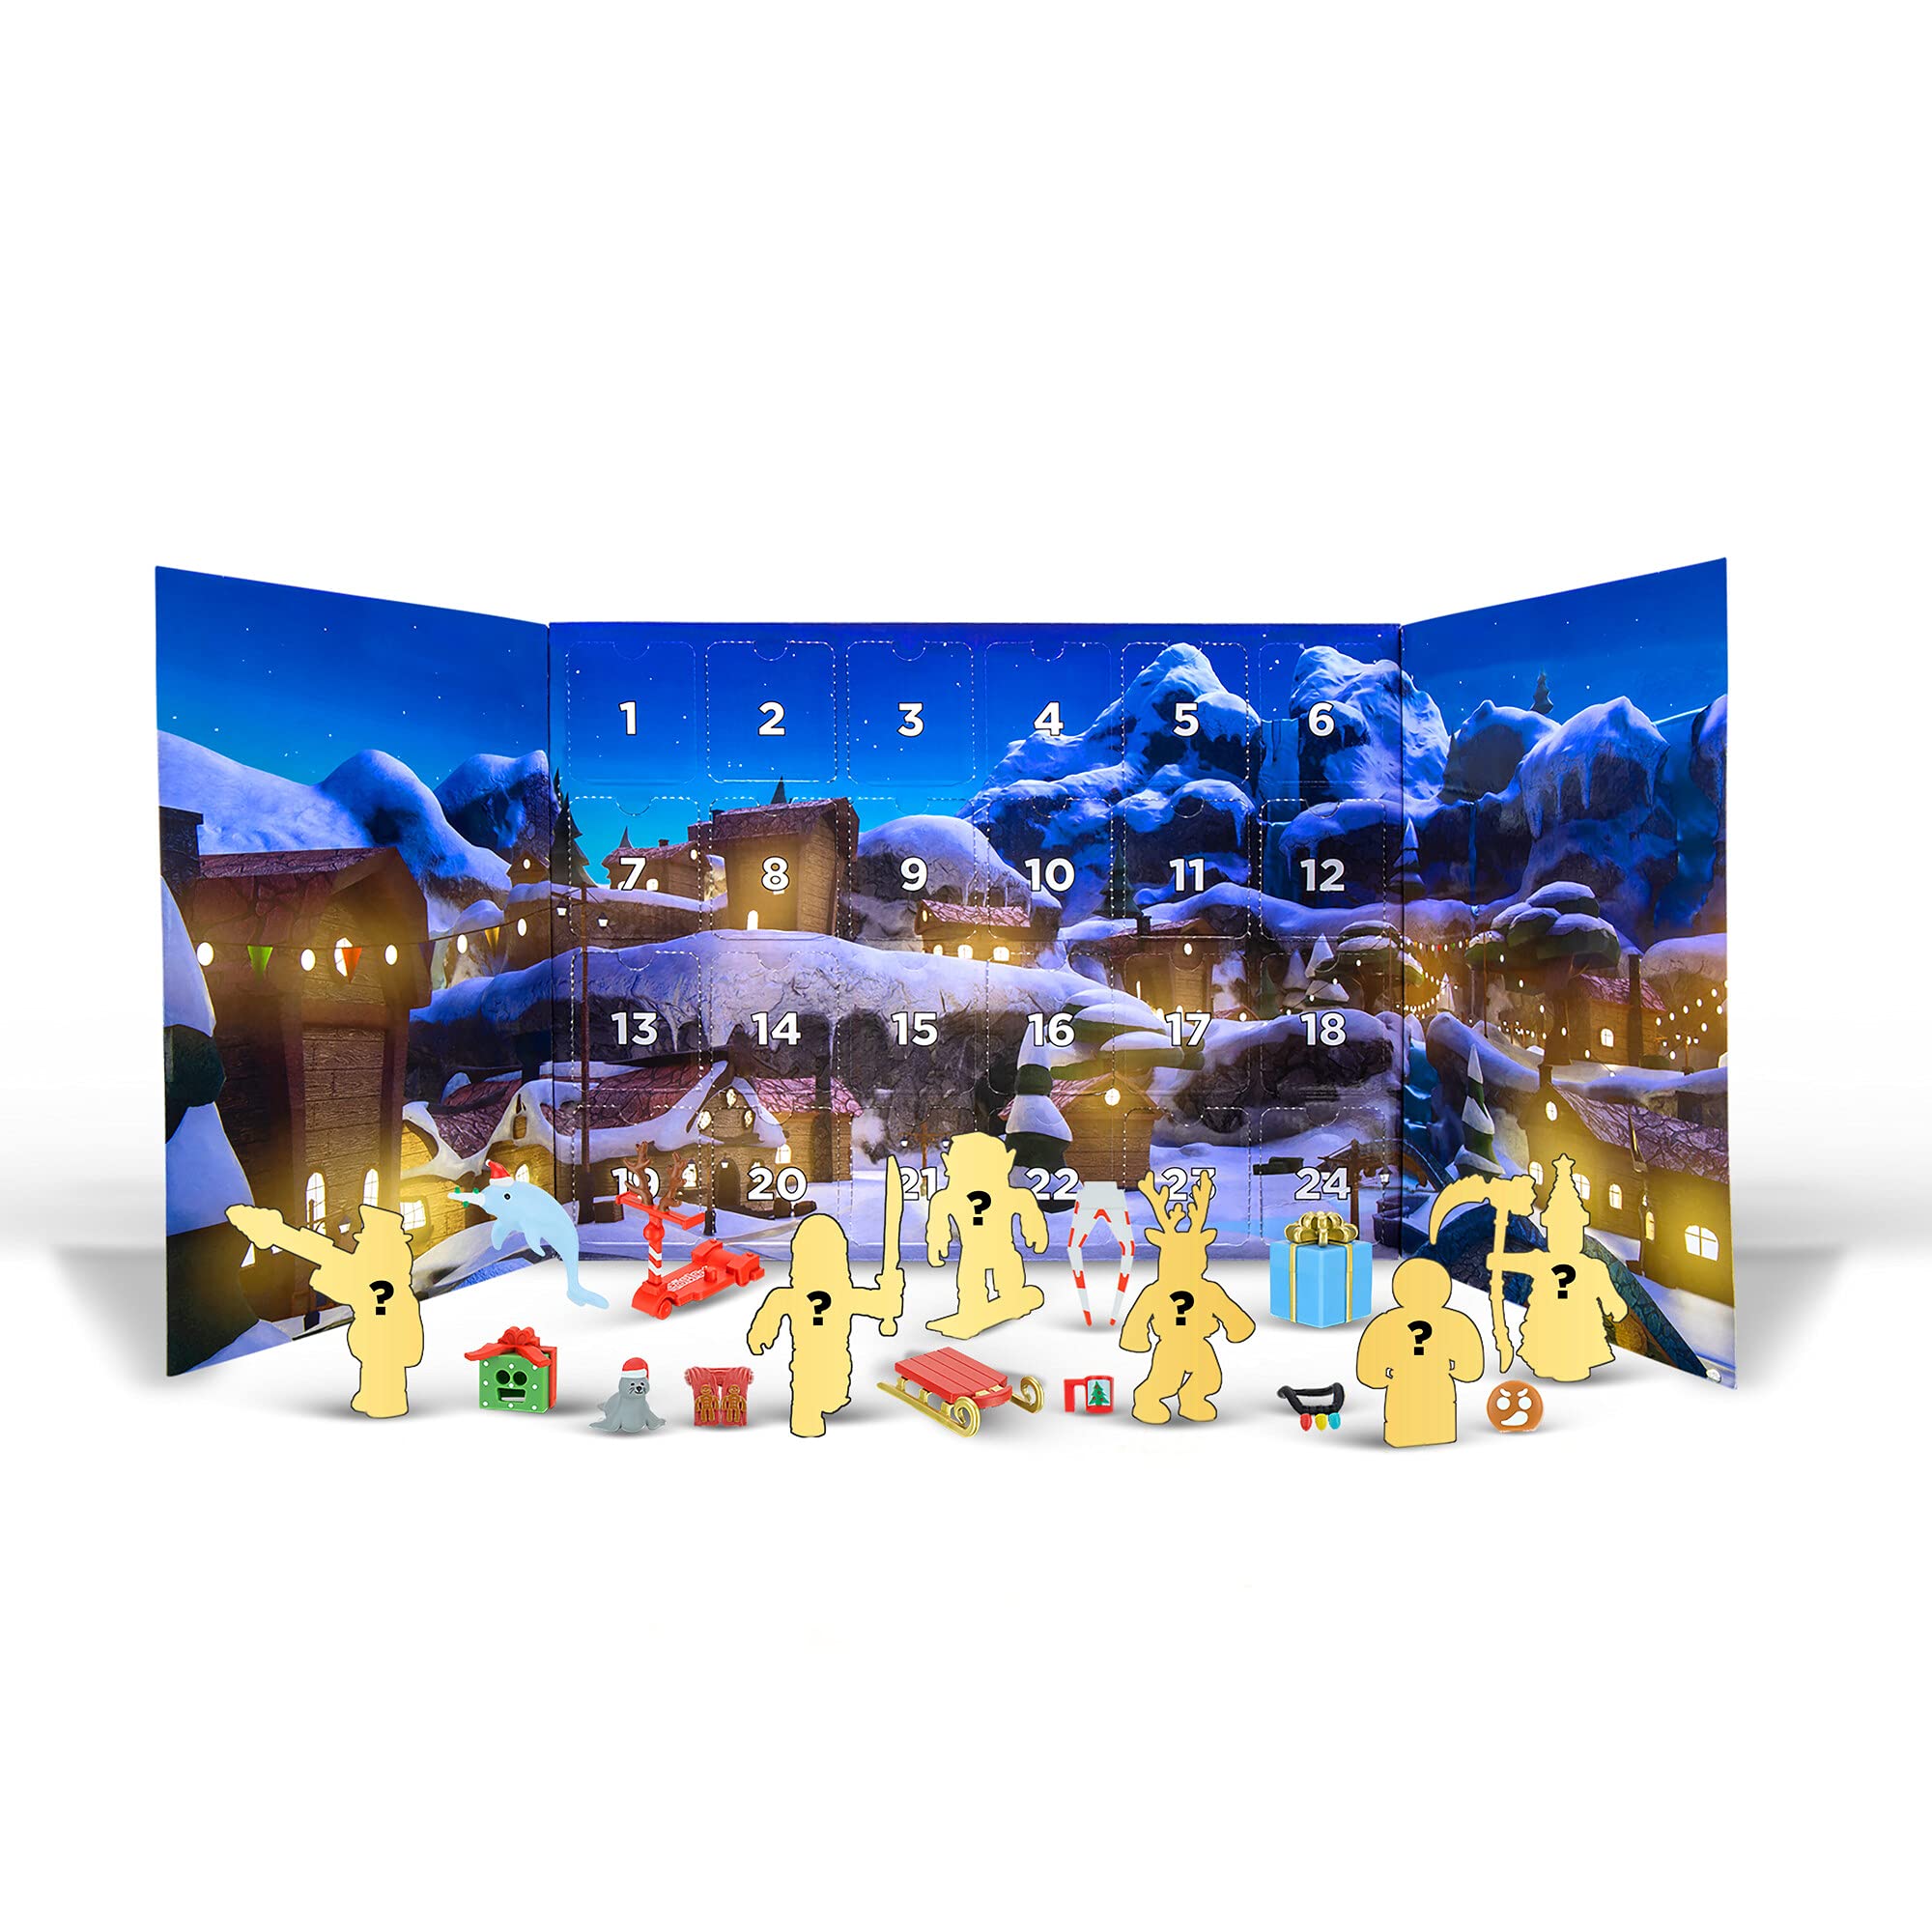 Roblox Action Collection - Advent Calendar [Includes 2 Exclusive Virtual  Items] 